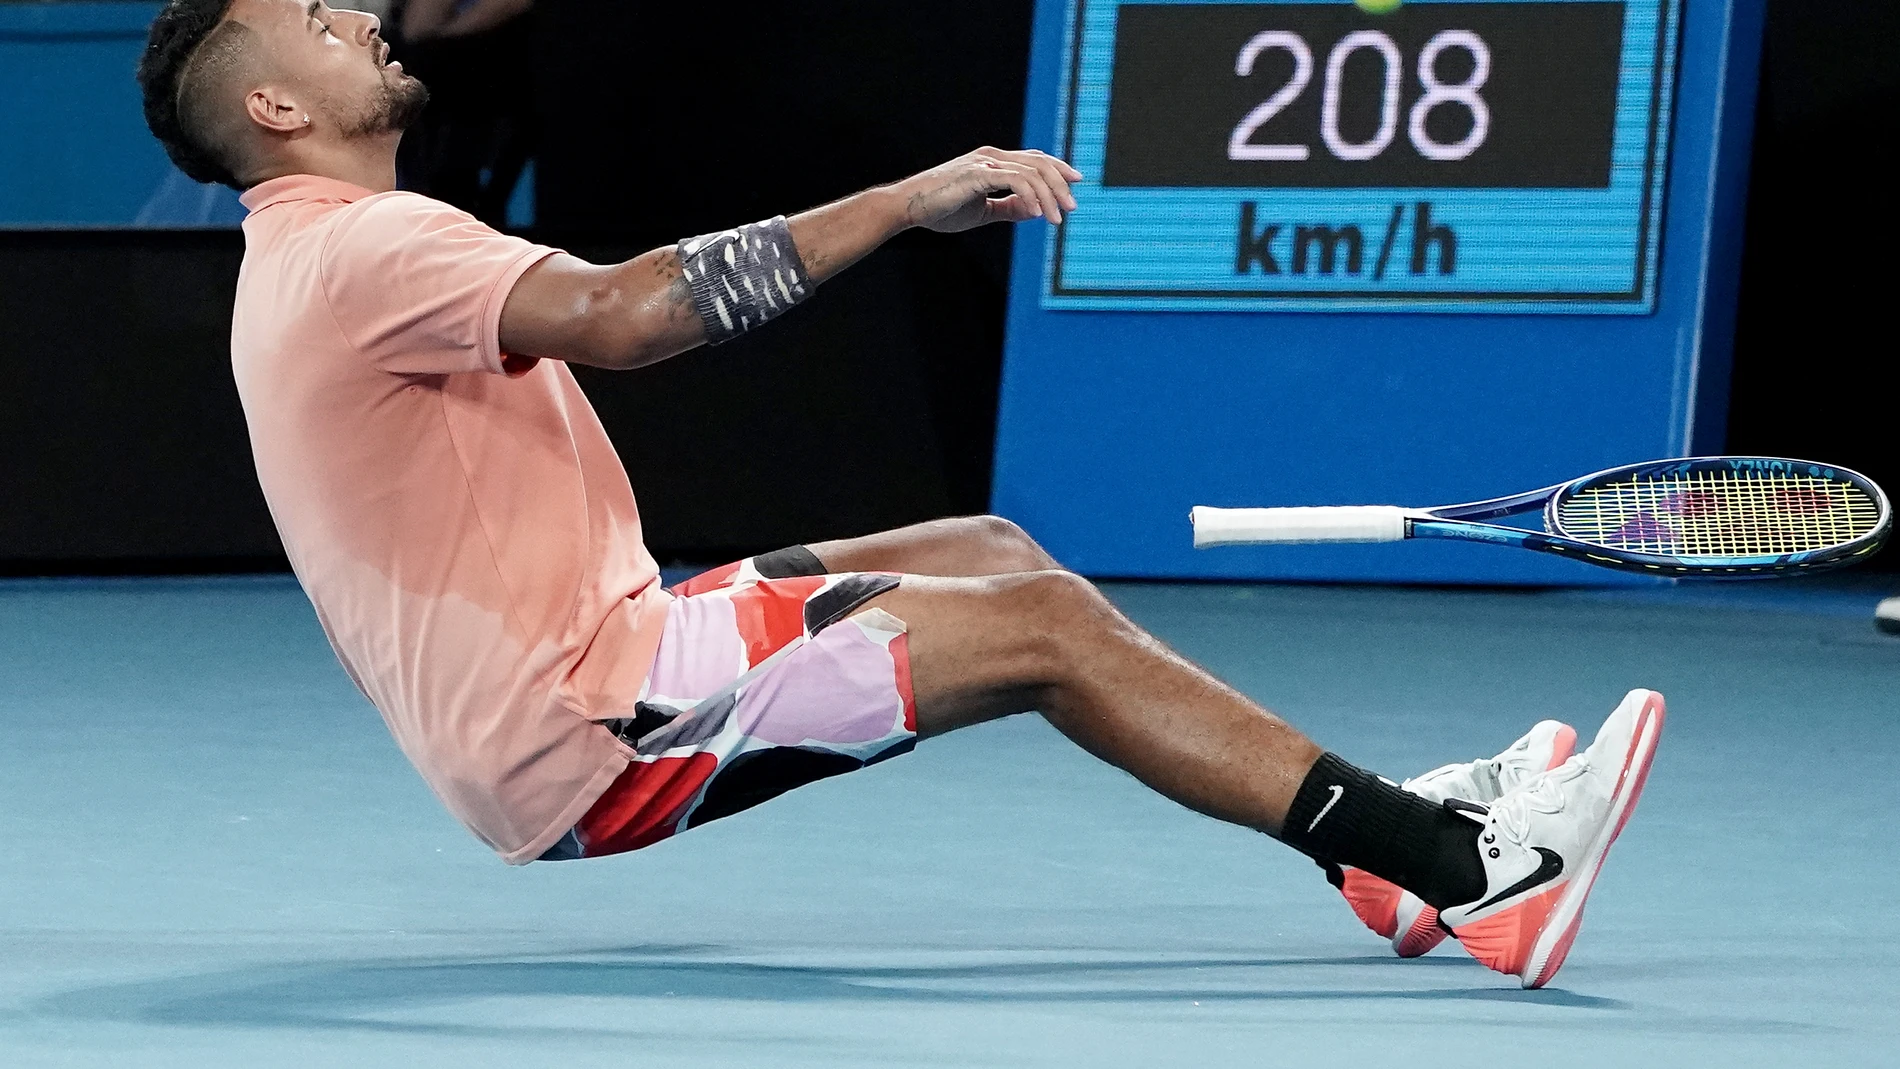 Nick Kyrgios of Australia falls to the ground as he celebrates winning his third round match against Karen Kachanov of Russia on day six of the Australian Open tennis tournament at Melbourne Arena in Melbourne, Saturday, January 25, 2020. (AAP Image/Dave